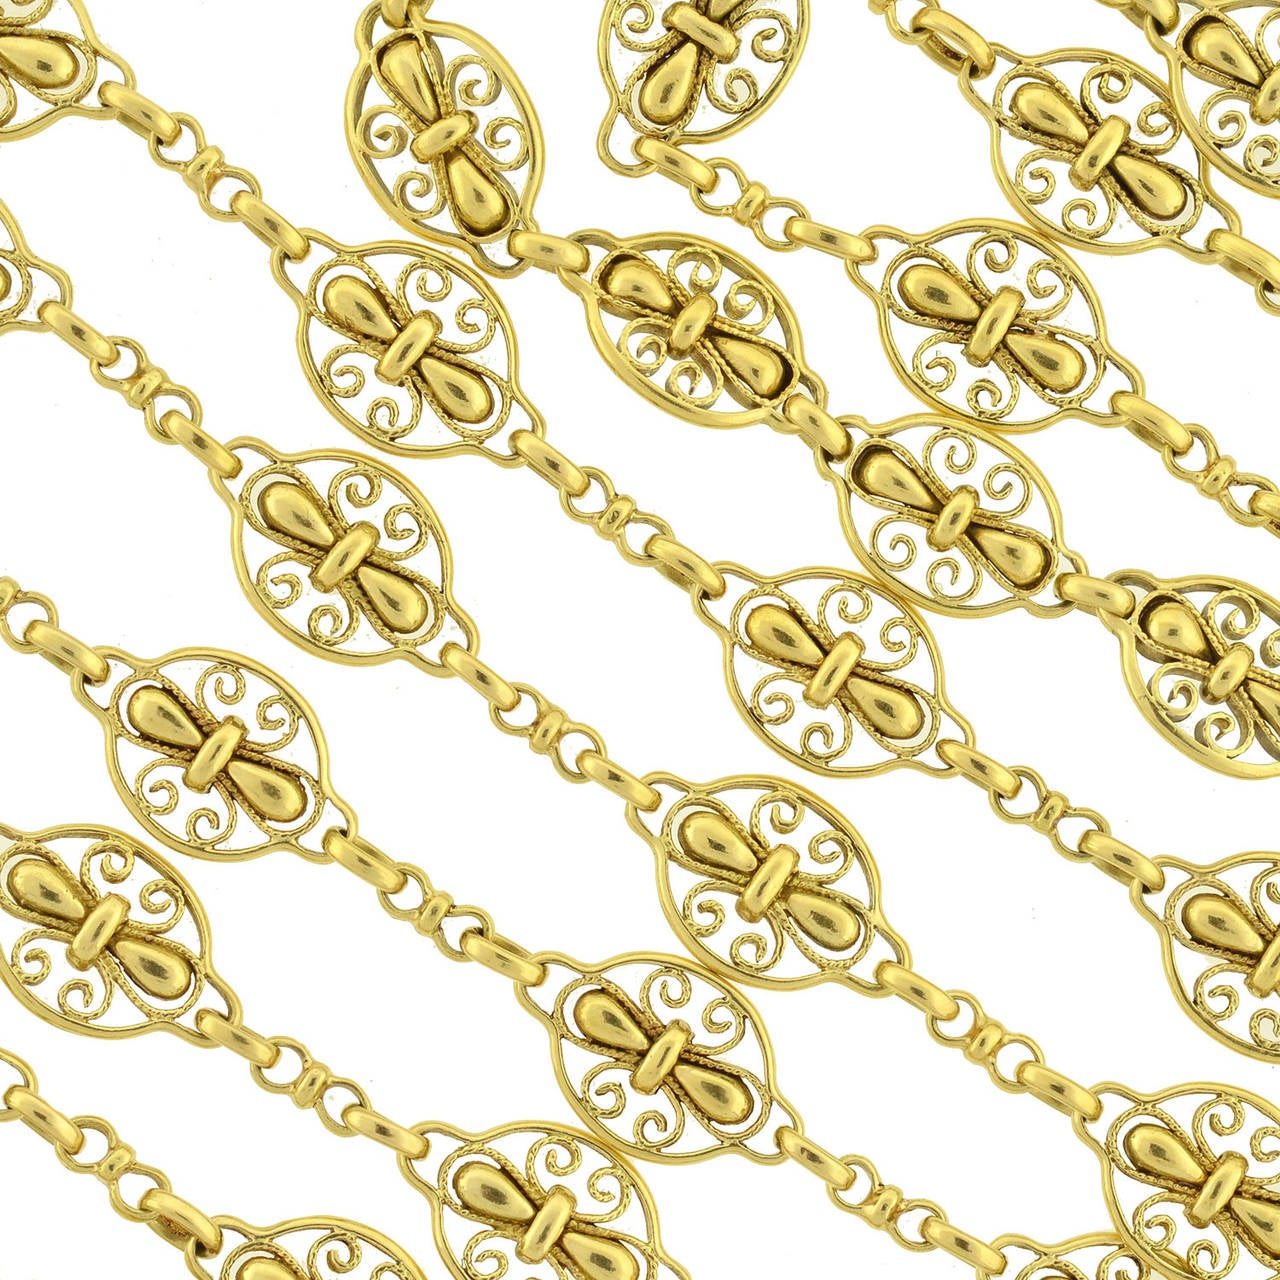 This stunning gold chain from the Art Nouveau (ca1900) era is quite a special piece! Substantial in both length and weight, this fancy chain is comprised of vibrant 18kt yellow gold links, which have a beautiful filigree Fleur de Lys design. Each